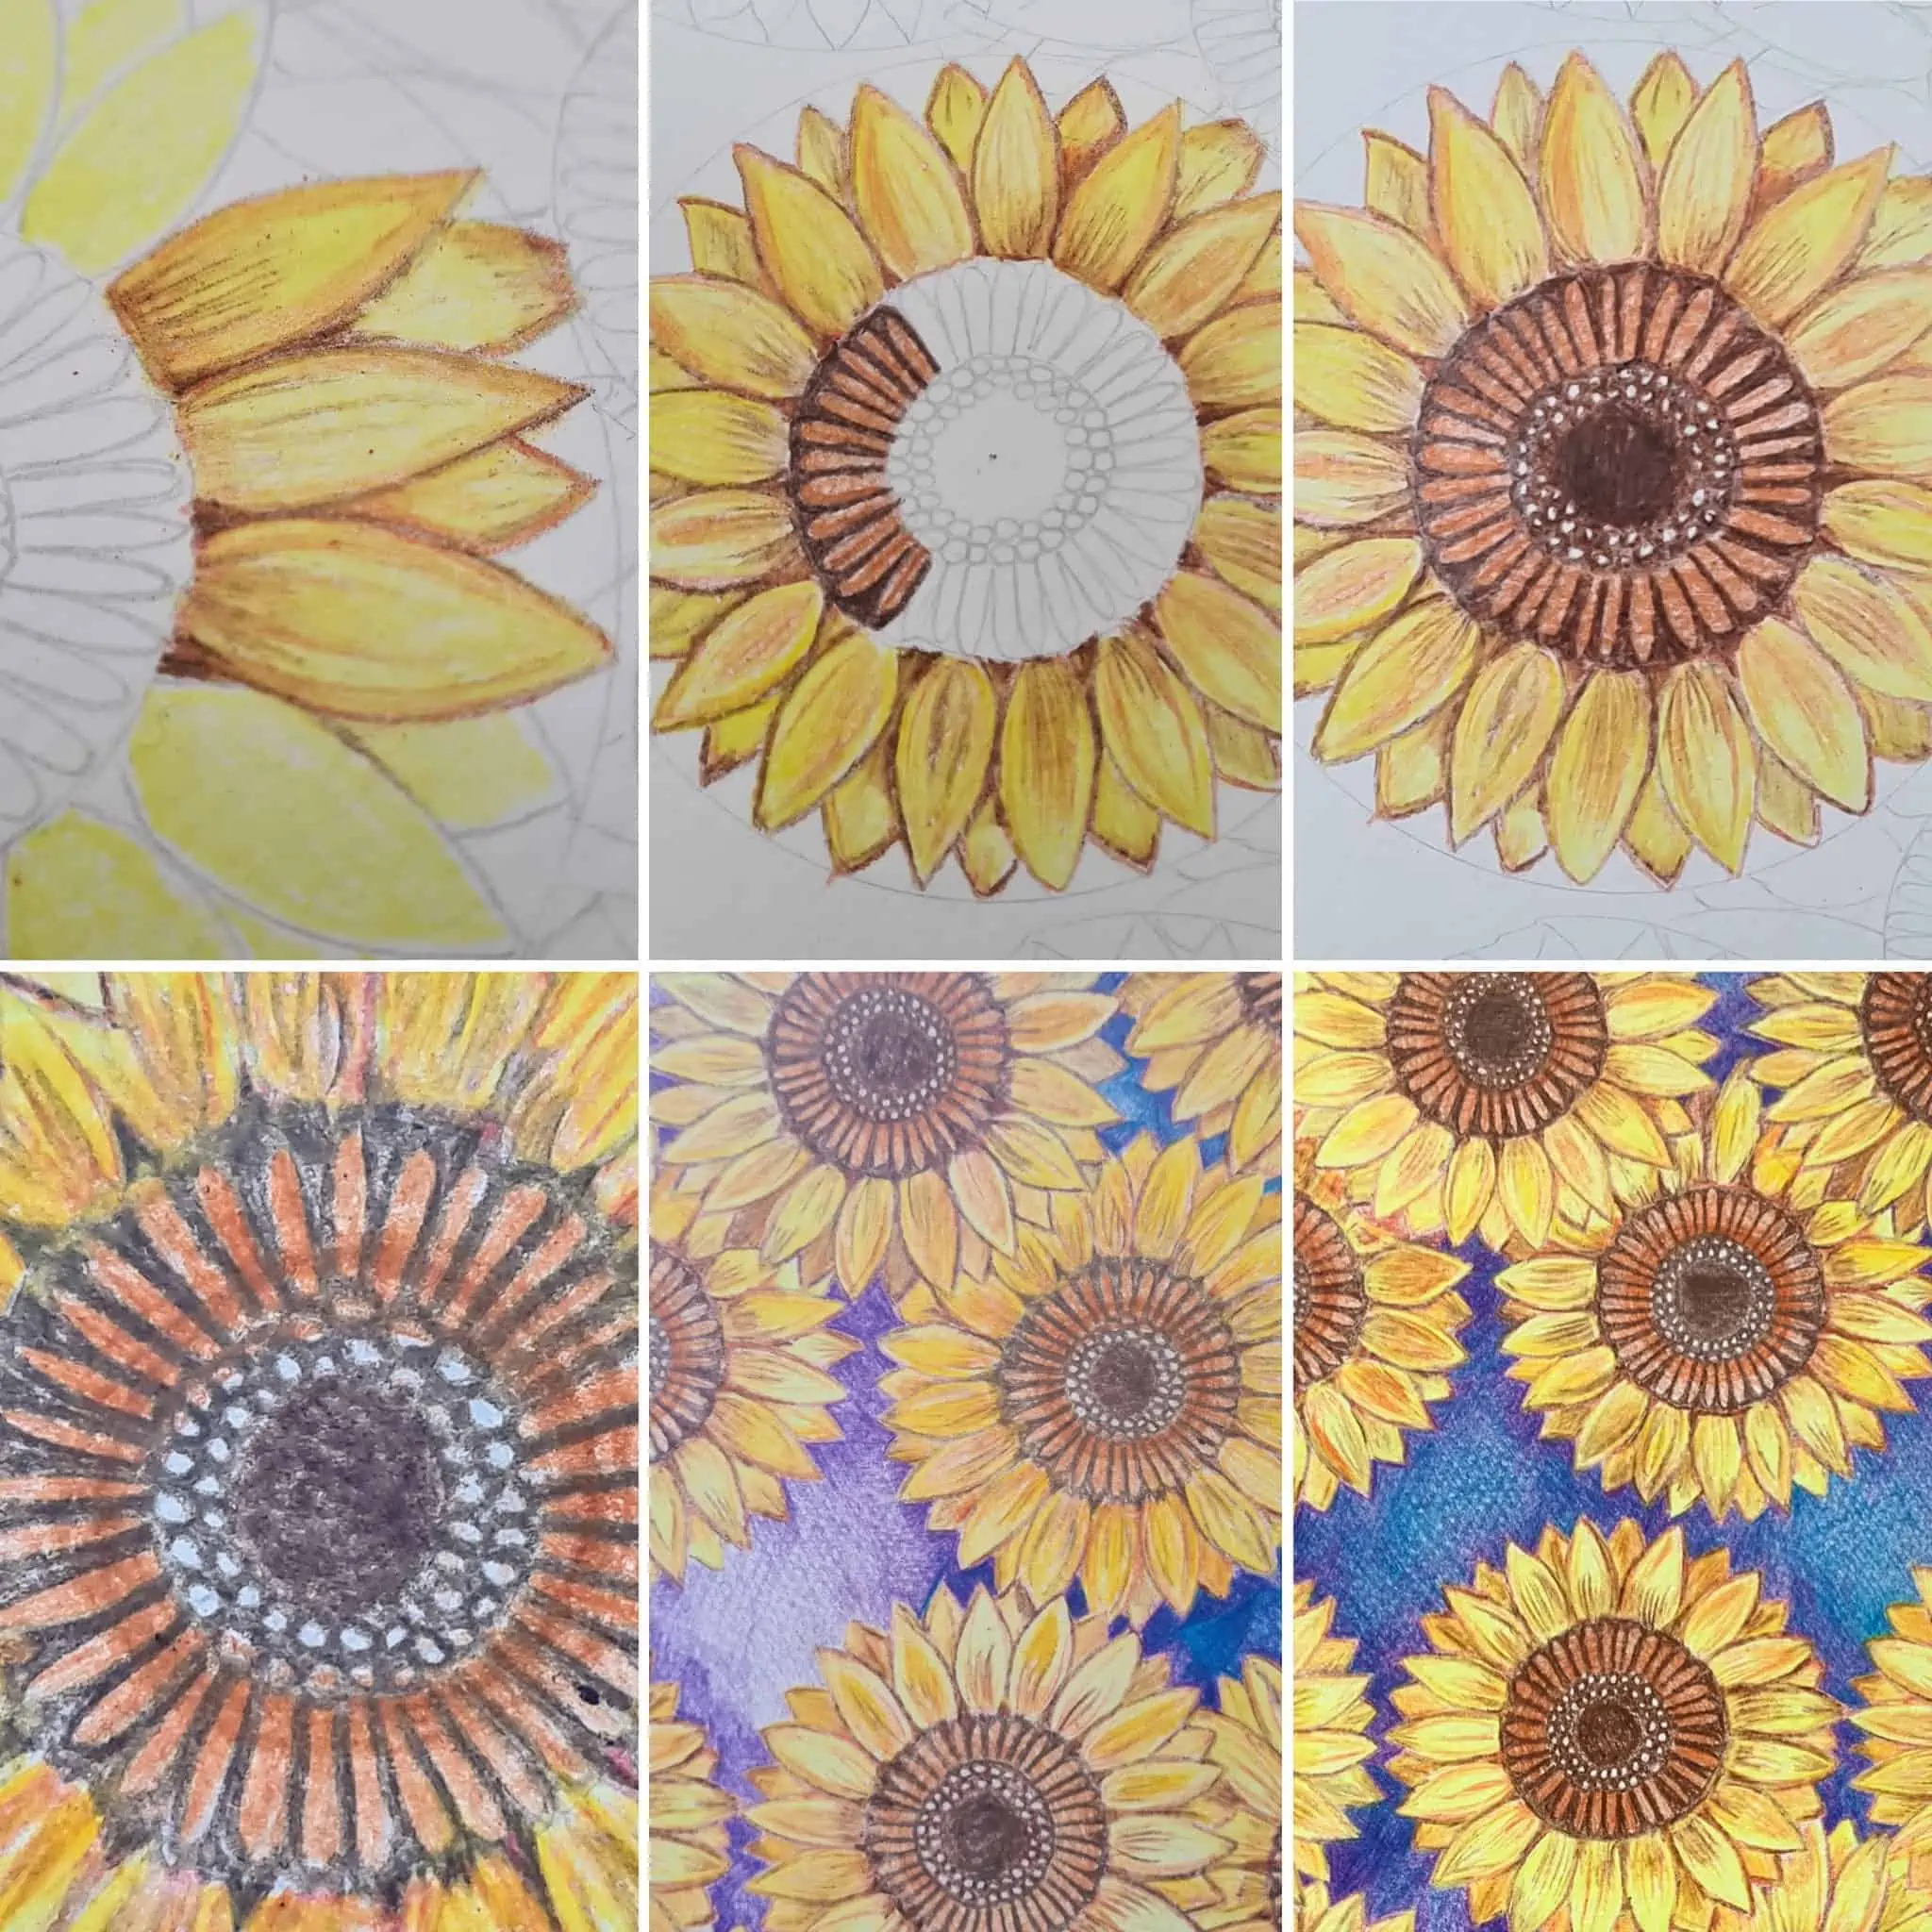 Sunflower-Colouring-Pencil-Step-By-Step-Image